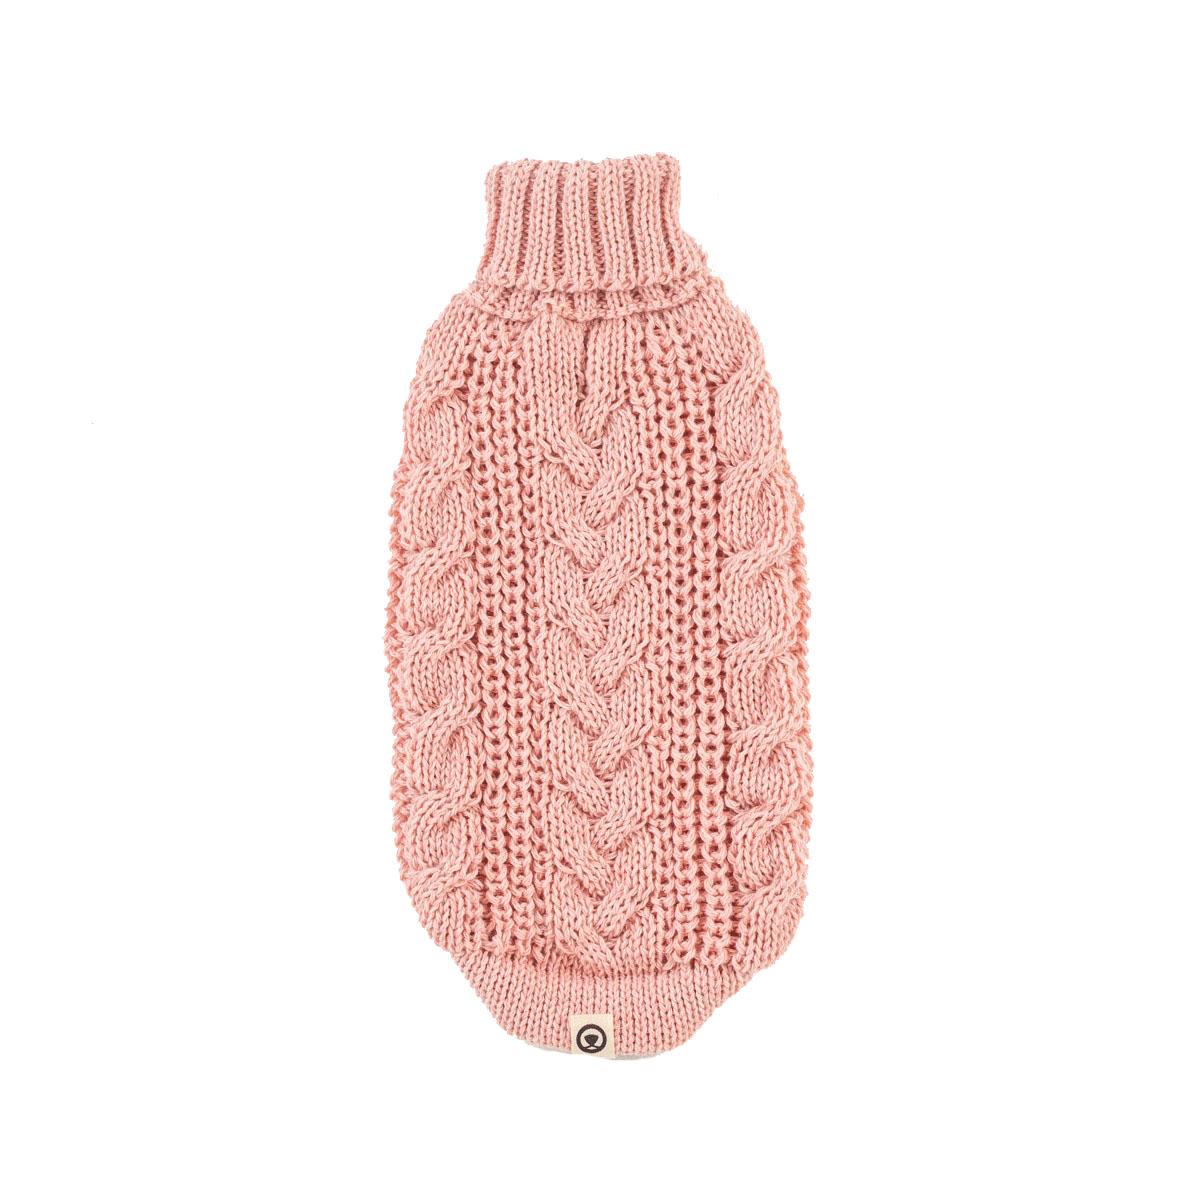 Hot Dogz Recycled Cotton Dog Sweater - Baby Pink